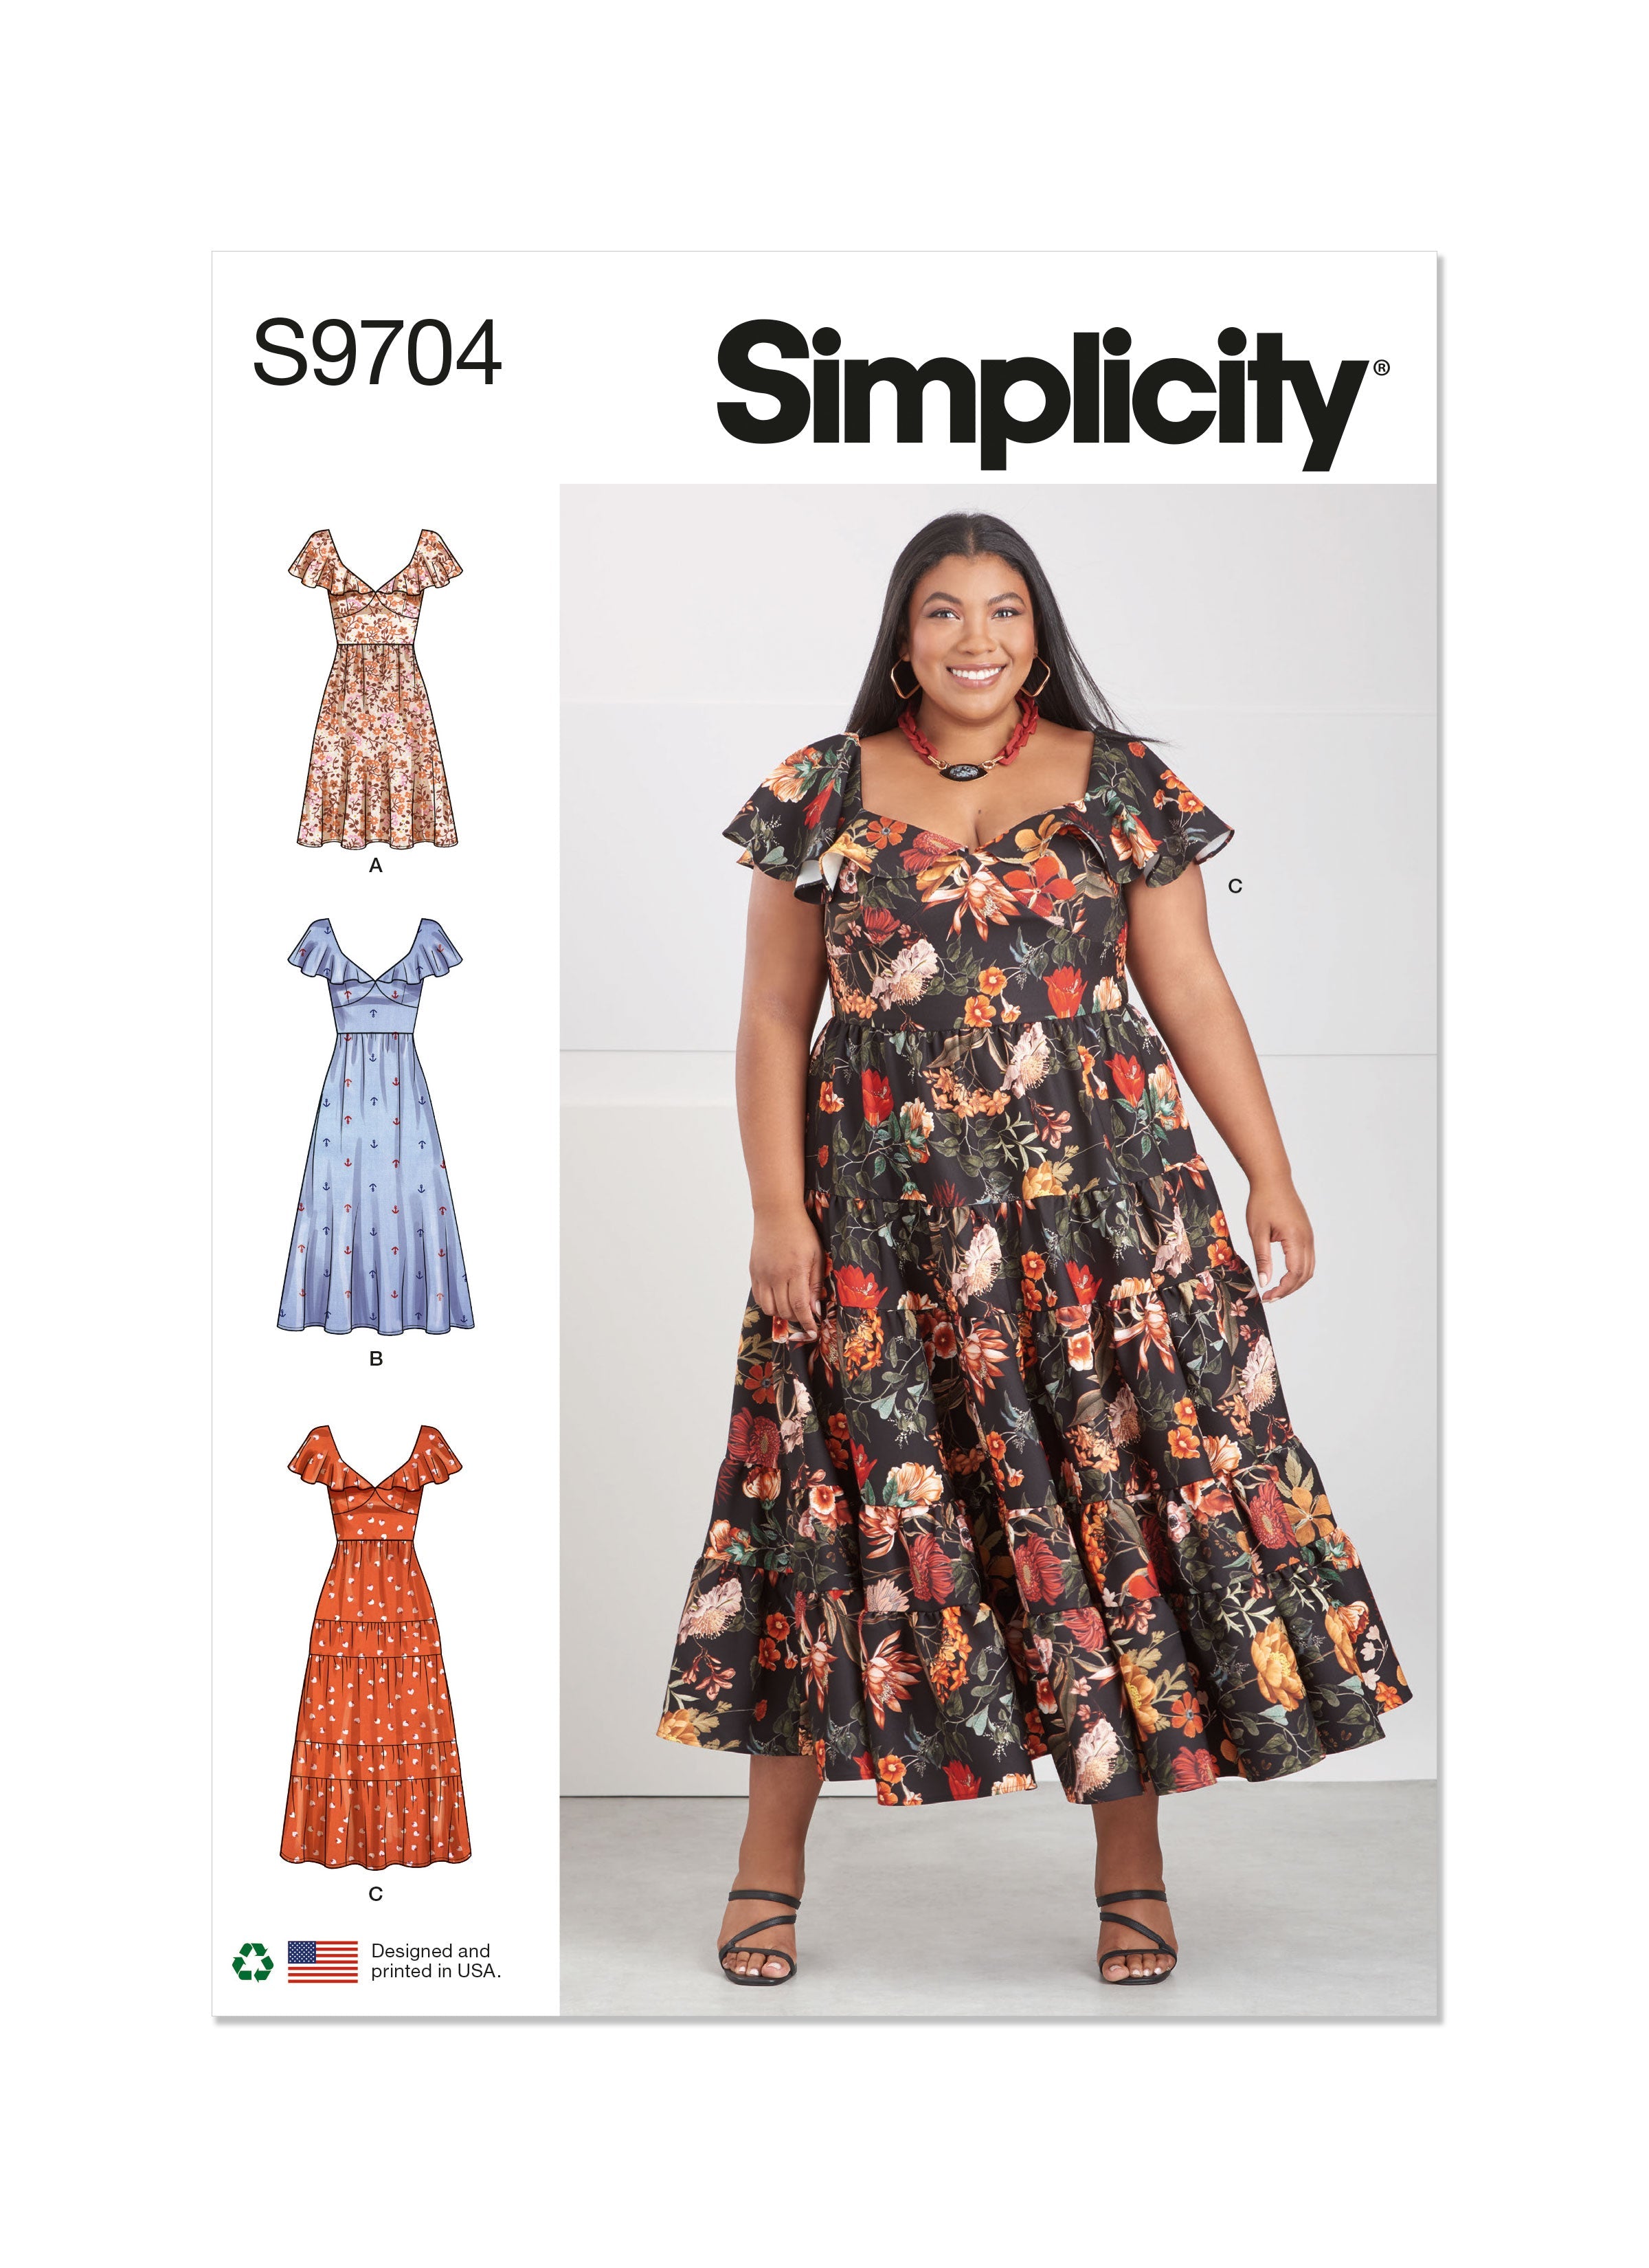 Simplicity 9704 Women's Dresses Sewing pattern from Jaycotts Sewing Supplies